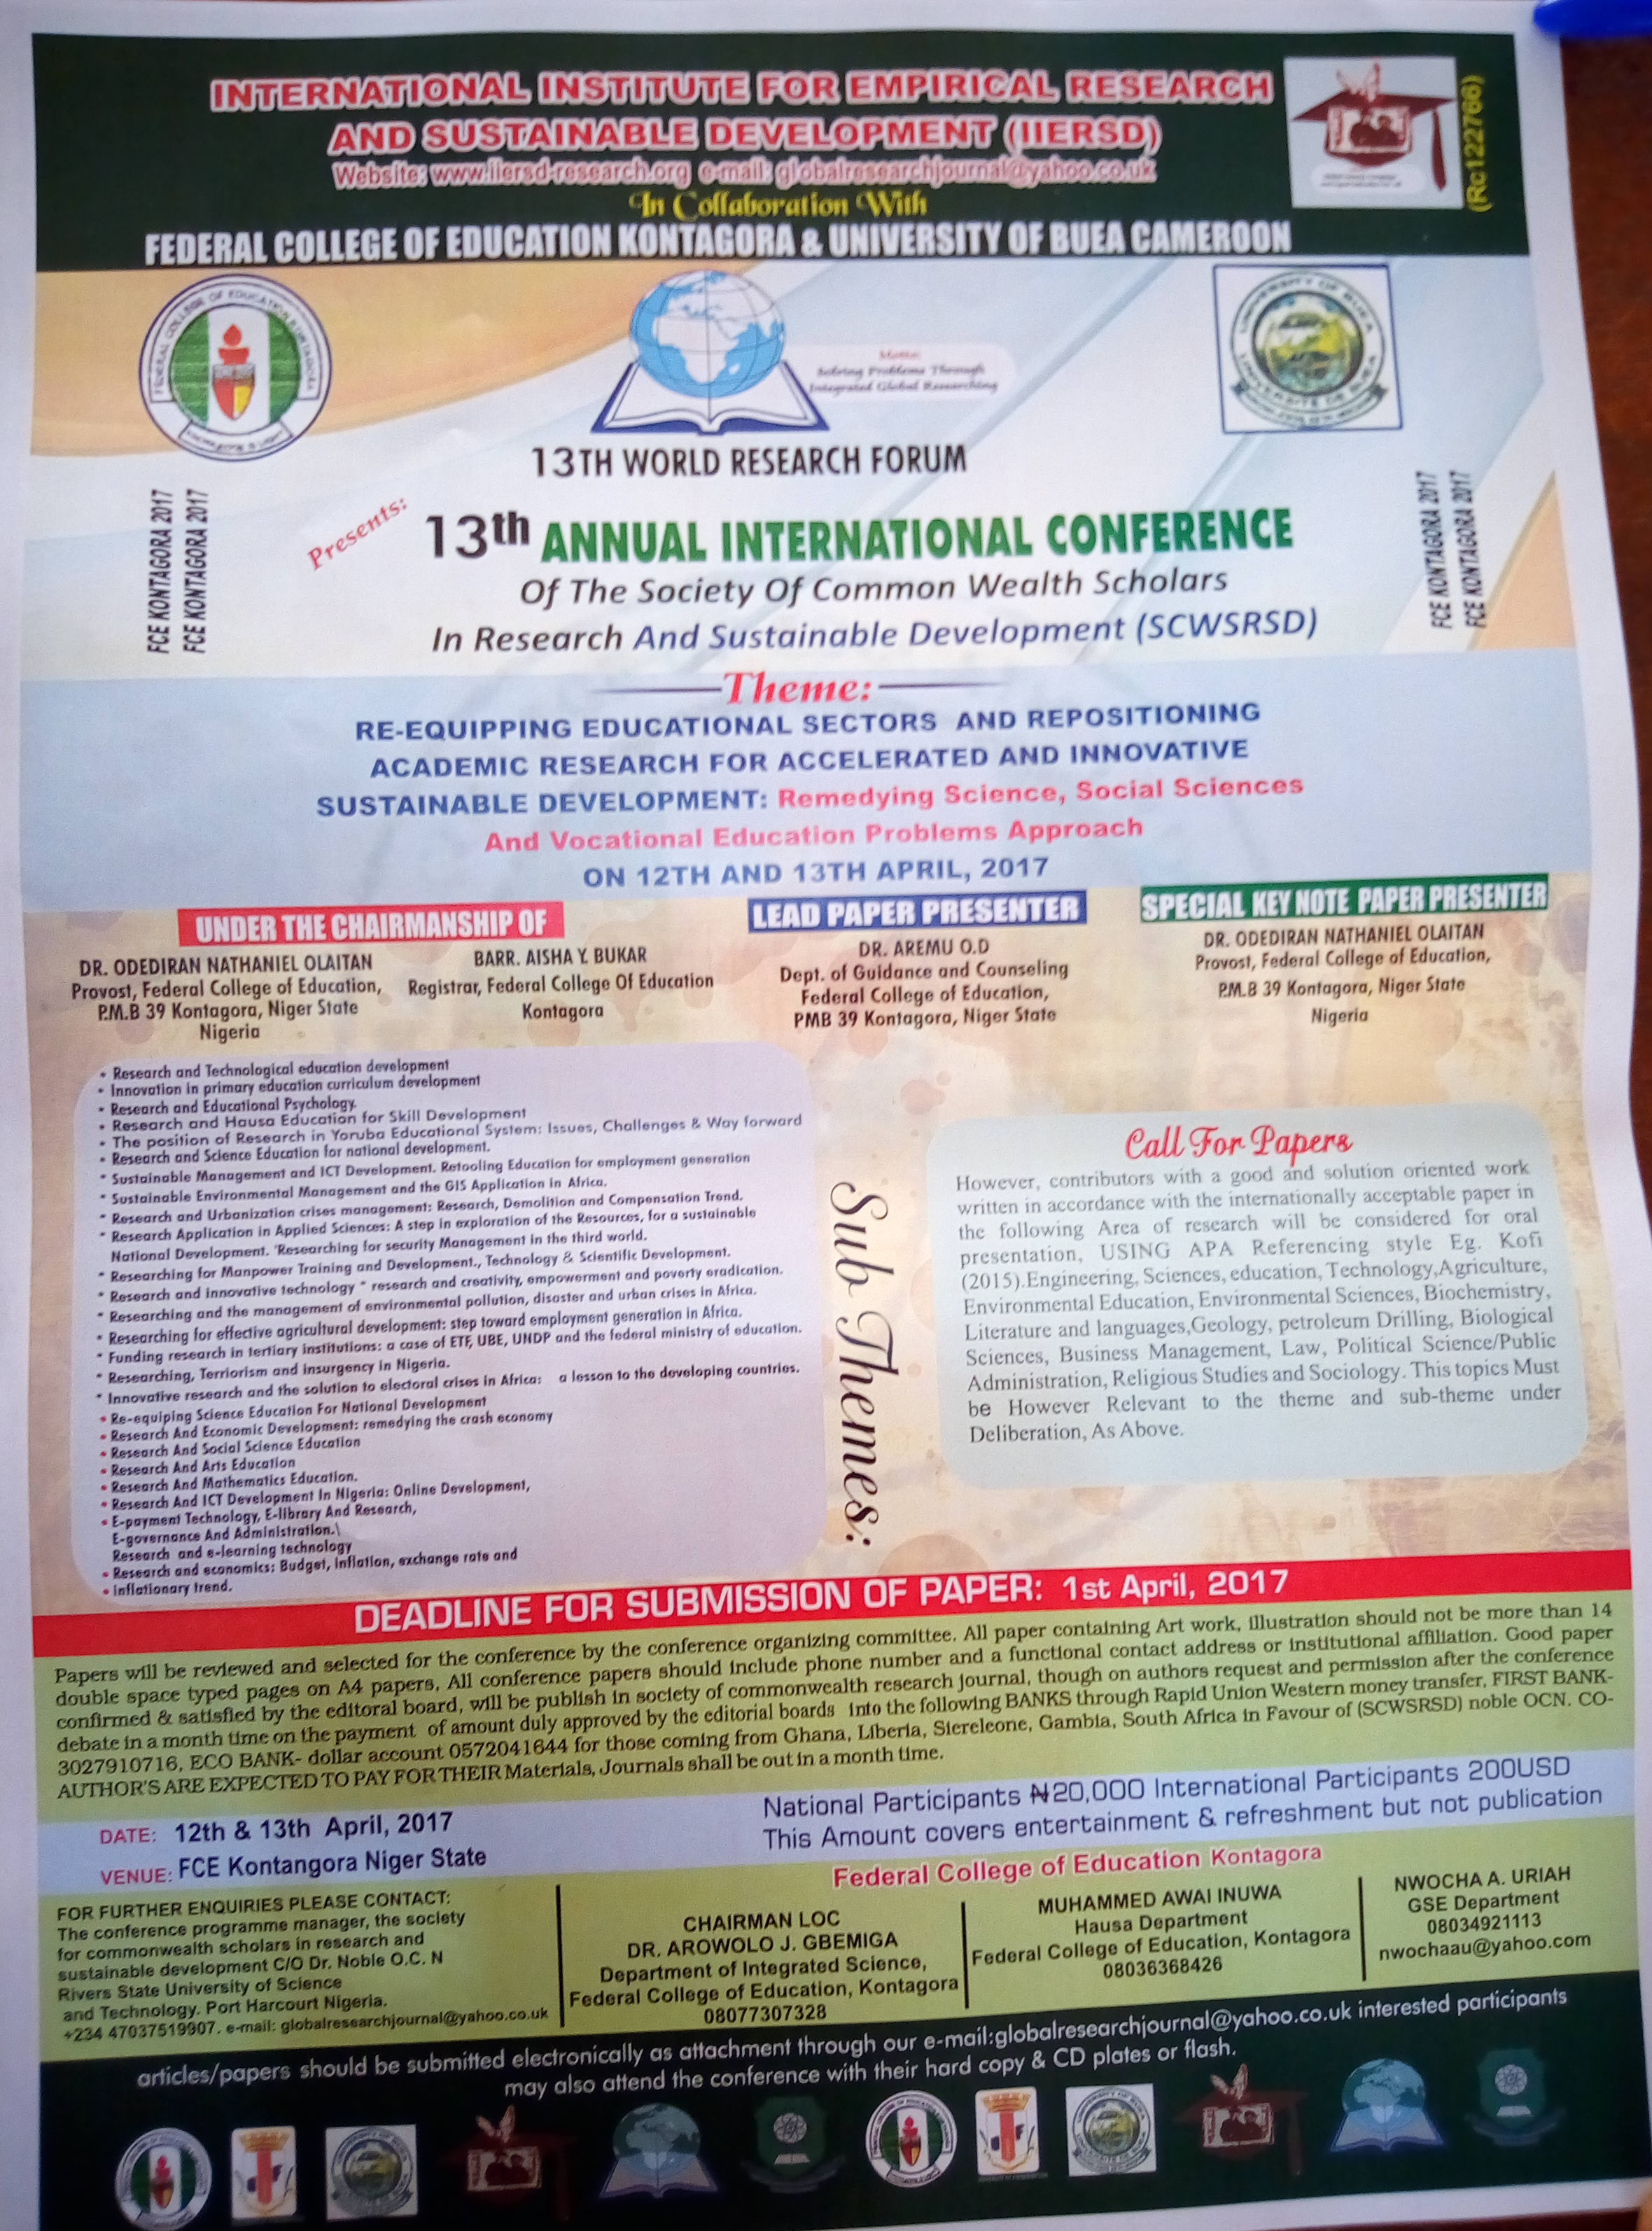 The theme is RE-EQUIPPING EDUCATIONAL SECTORS AND RE-POSITIONING ACADEMIC RESEARCH FOR ACCELERATED AND INNOVATIVE SUSTAINABLE DEVELOPMENT: Remeding Science, Social Science and Vocational Education Problems approach with several other sub-themes. The conference comes up as a joint effort of Federal College of Education Kontagora and University of Buea Cameroon. Abstracts are hereby invited for presentation at the conference from people in all works of life.